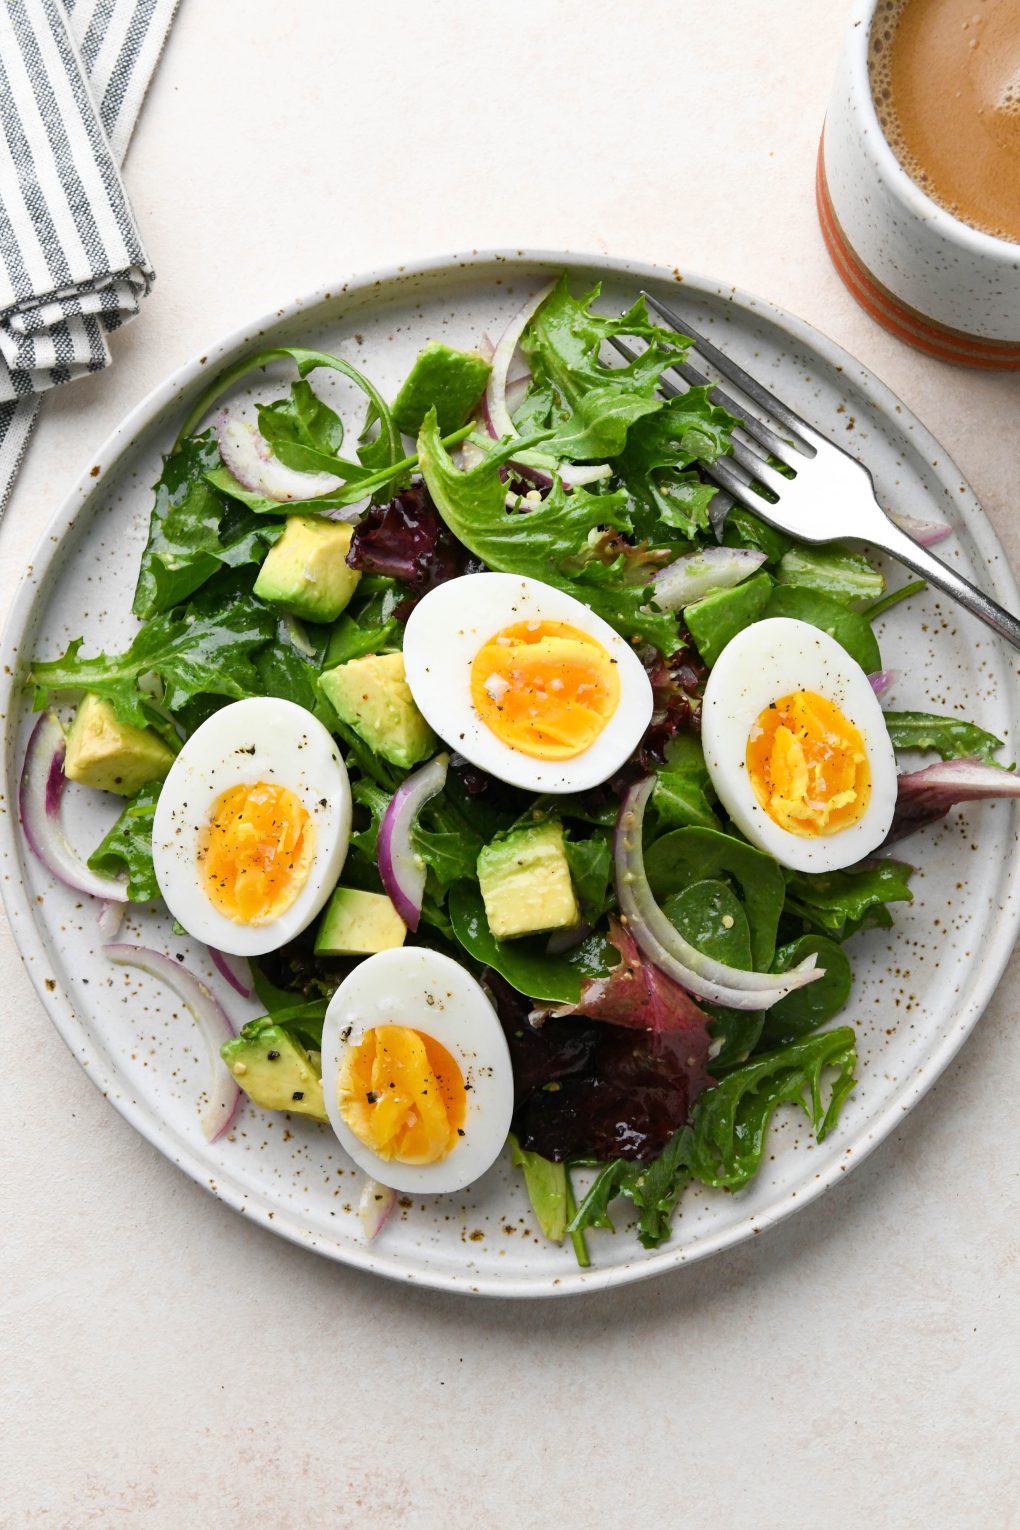 Whole30 breakfast on a speckled plate:Hard boiled eggs over a simple green salad with avocado.